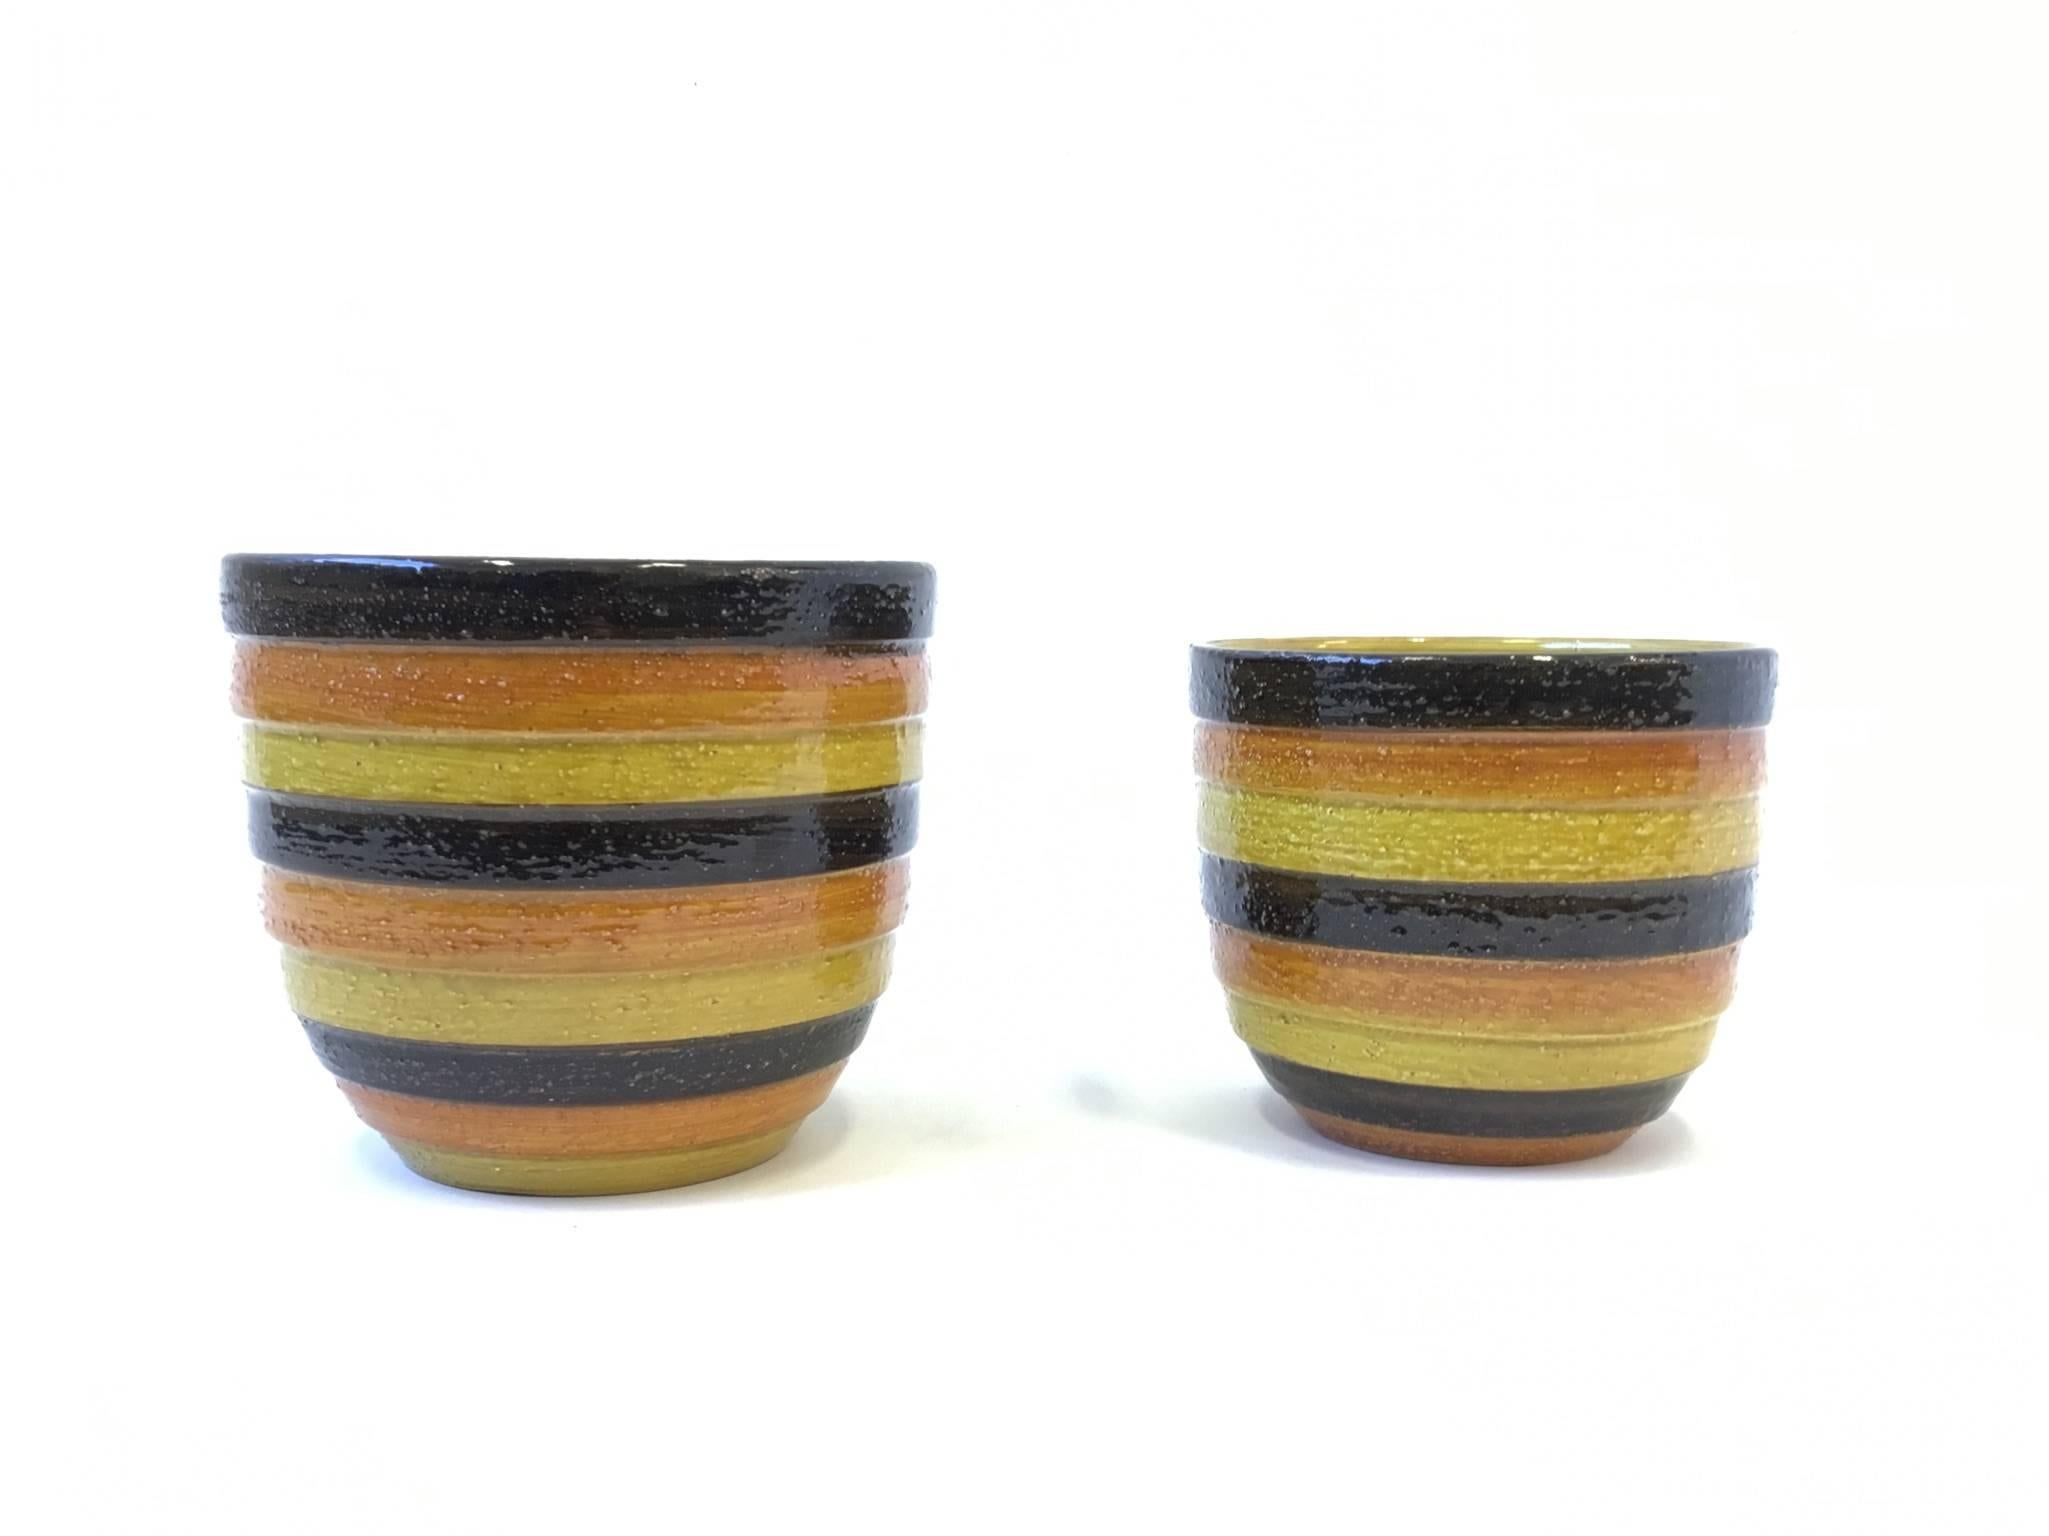 A pair of Italian ceramic planters or bowls design in the 1960s by Bitossi for Rosenthal Netter. The pair are different size, the large one is 8.25